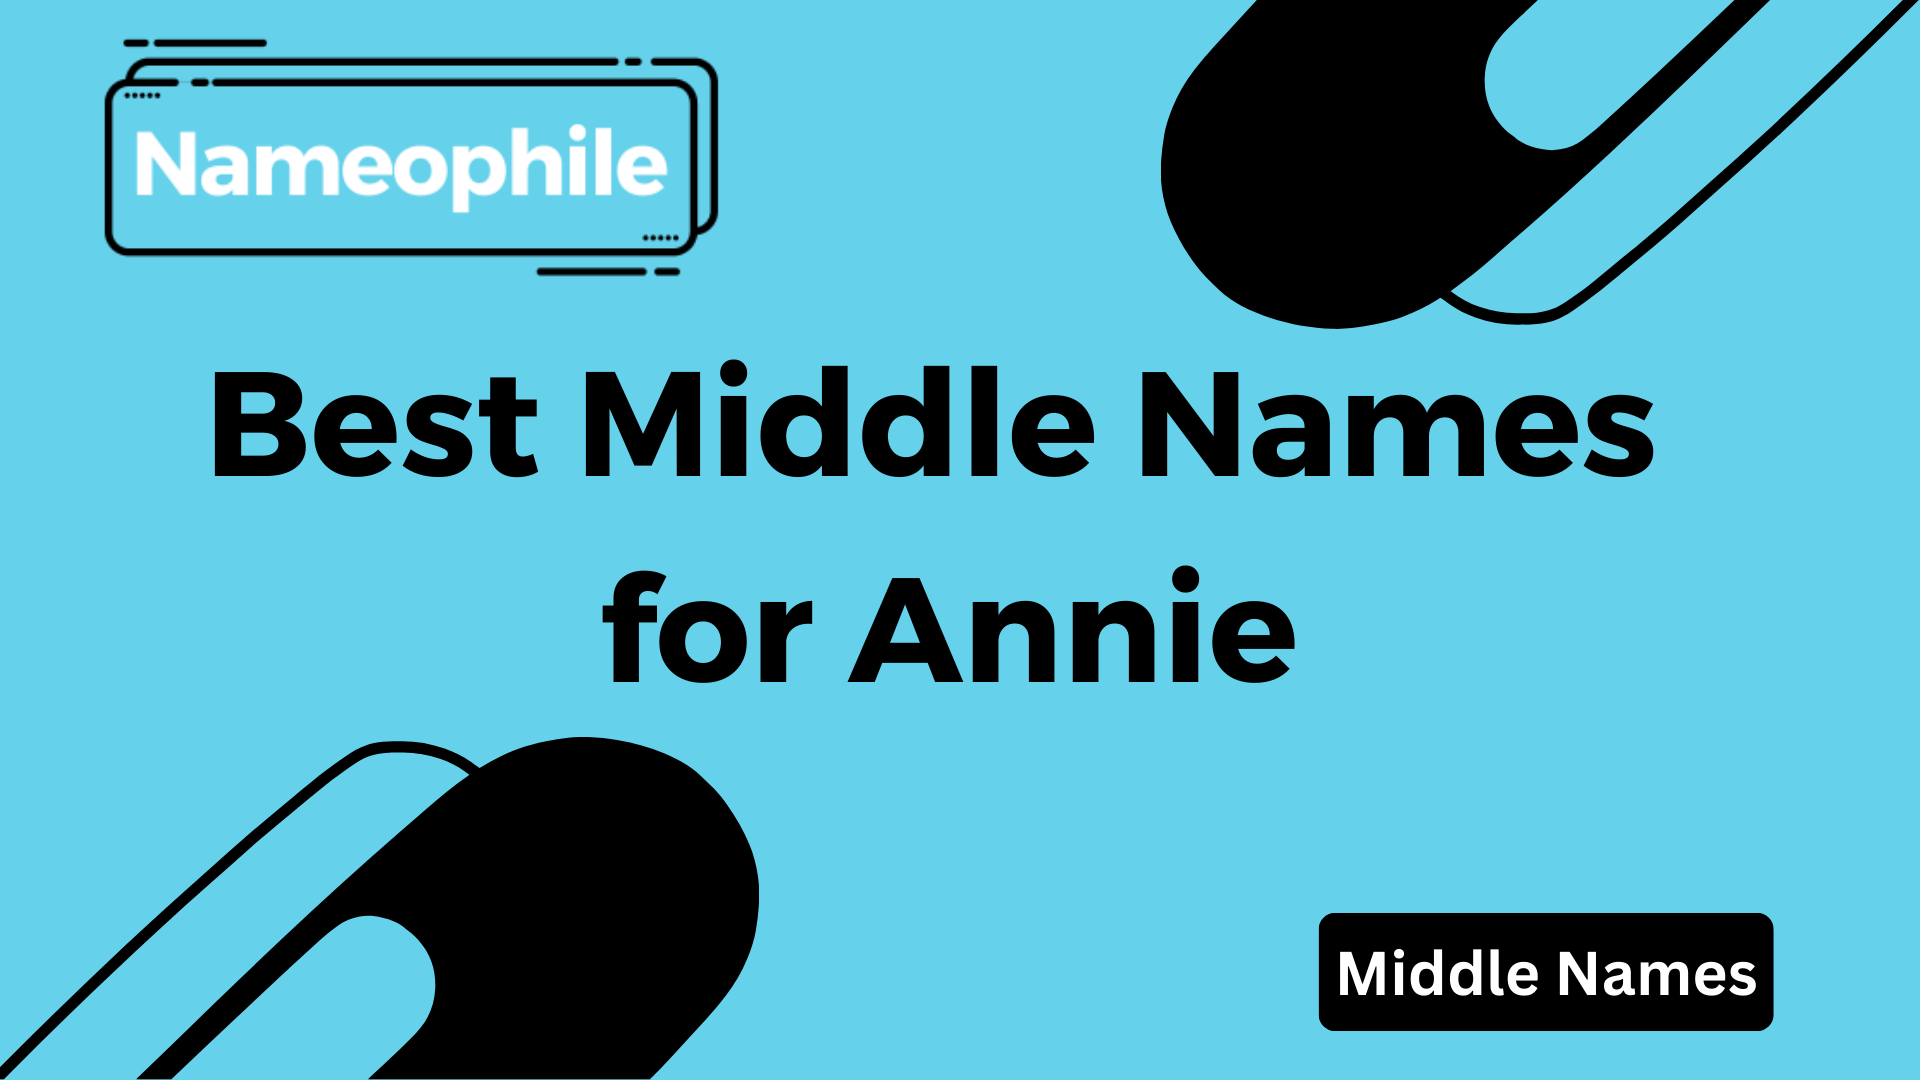 Best Middle Names for Annie (2)